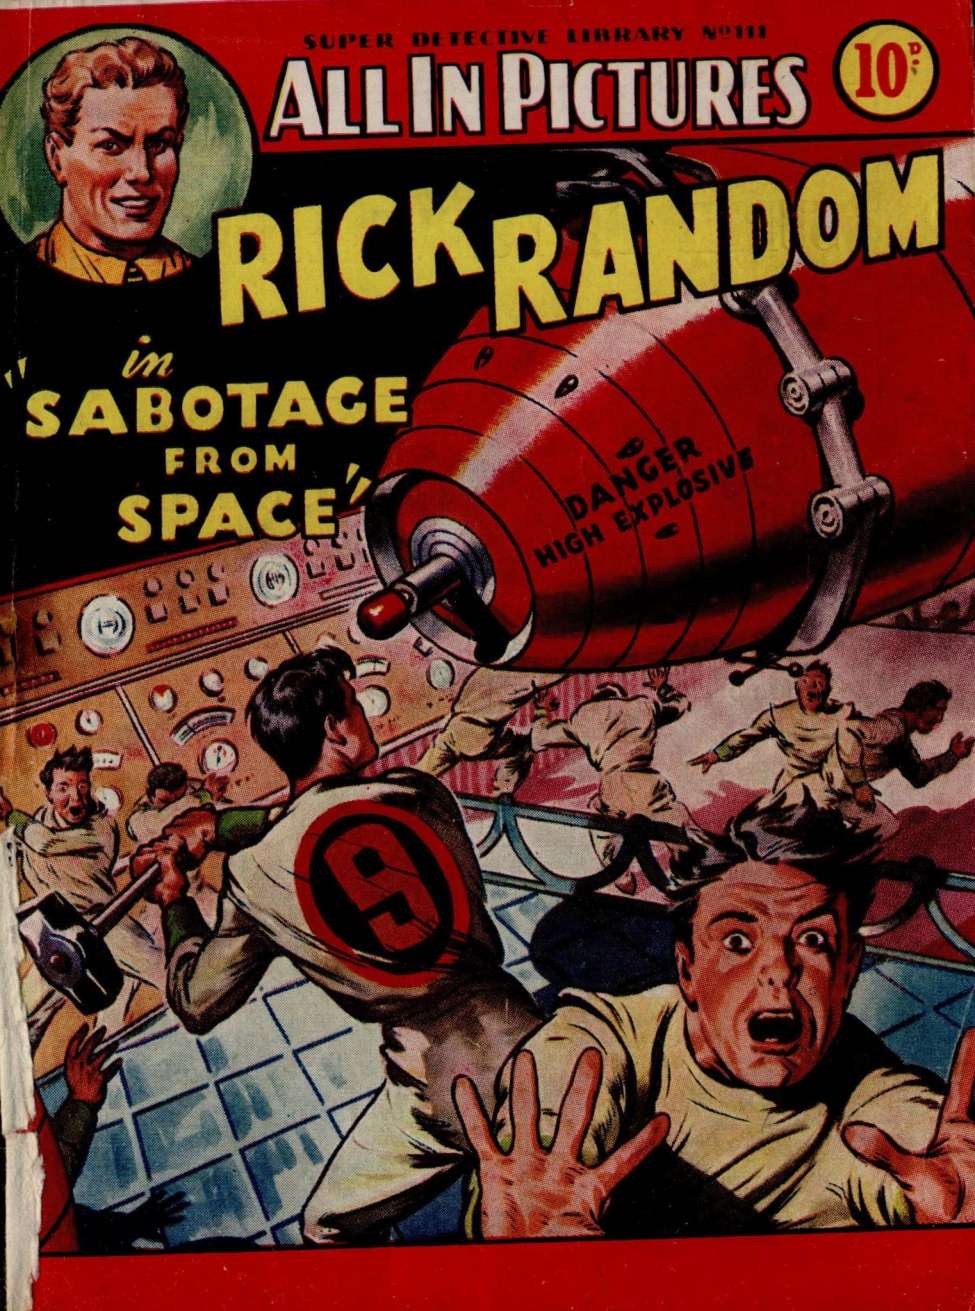 Book Cover For Super Detective Library 111 - Sabotage from Space